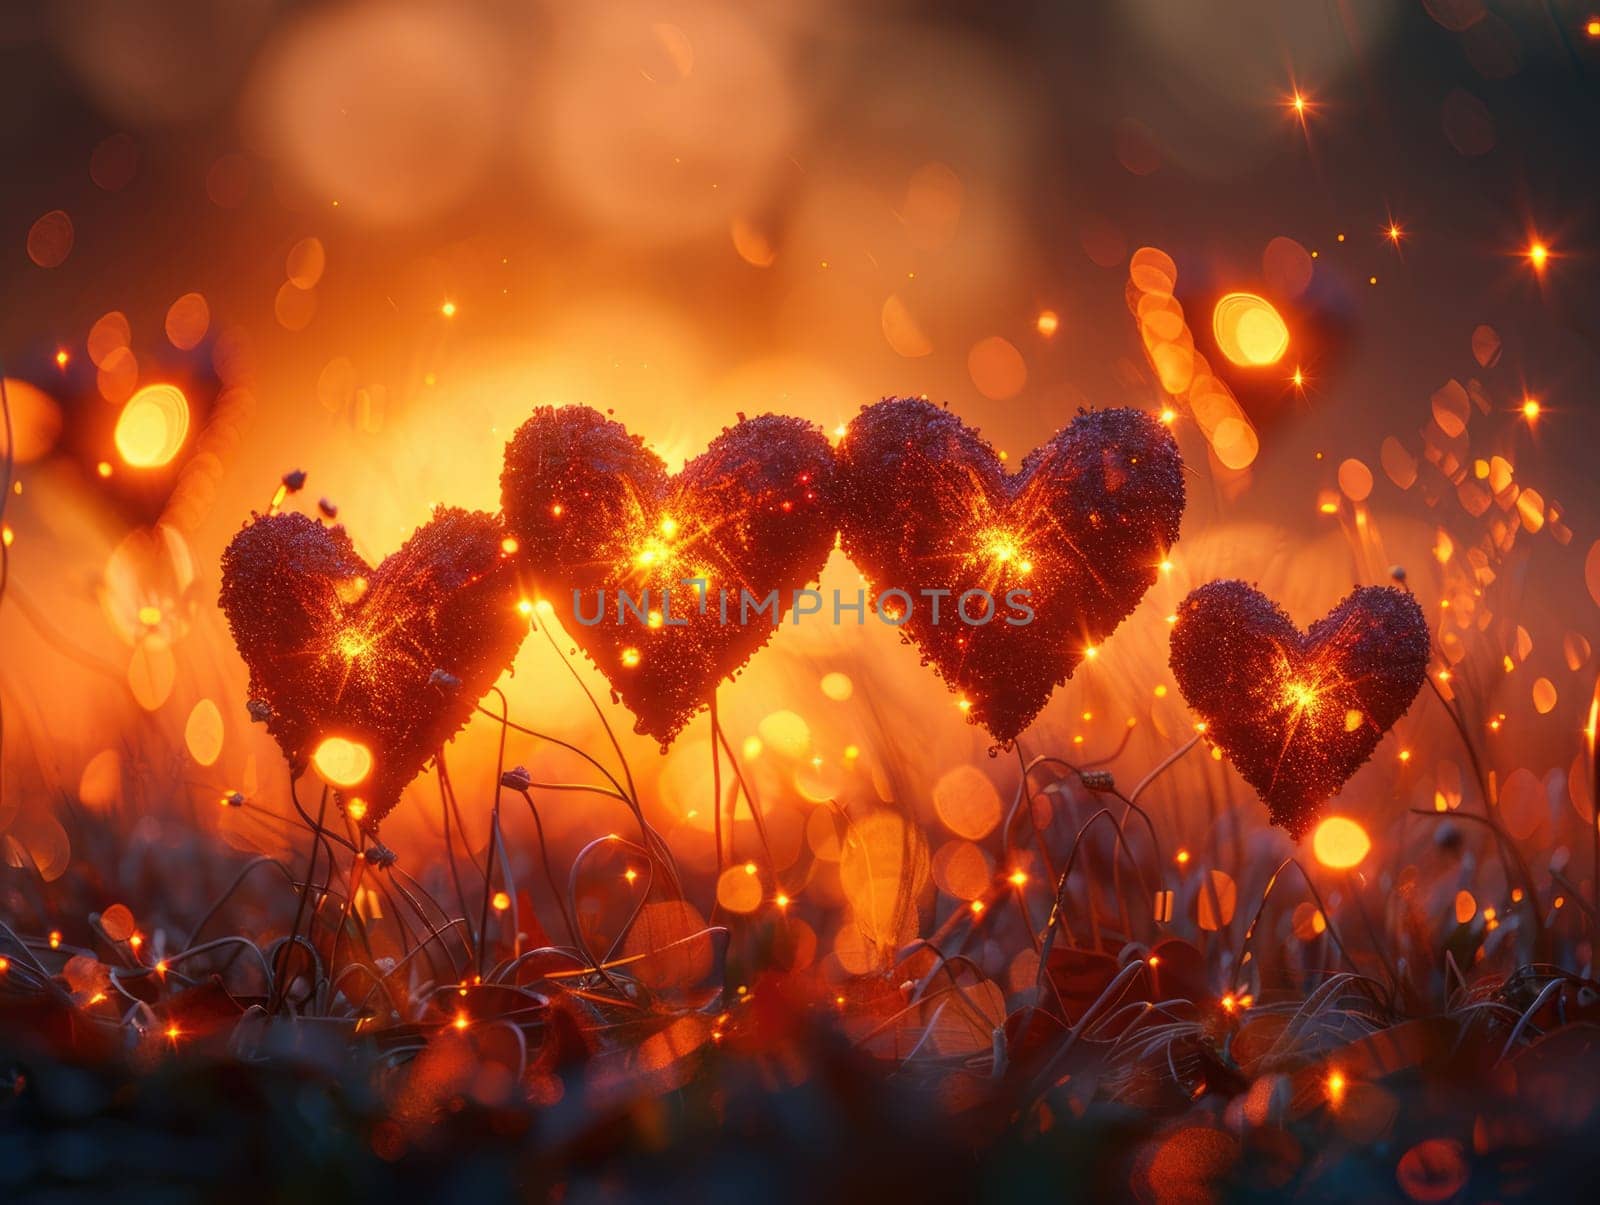 Hearts Scattered Across Grass by but_photo